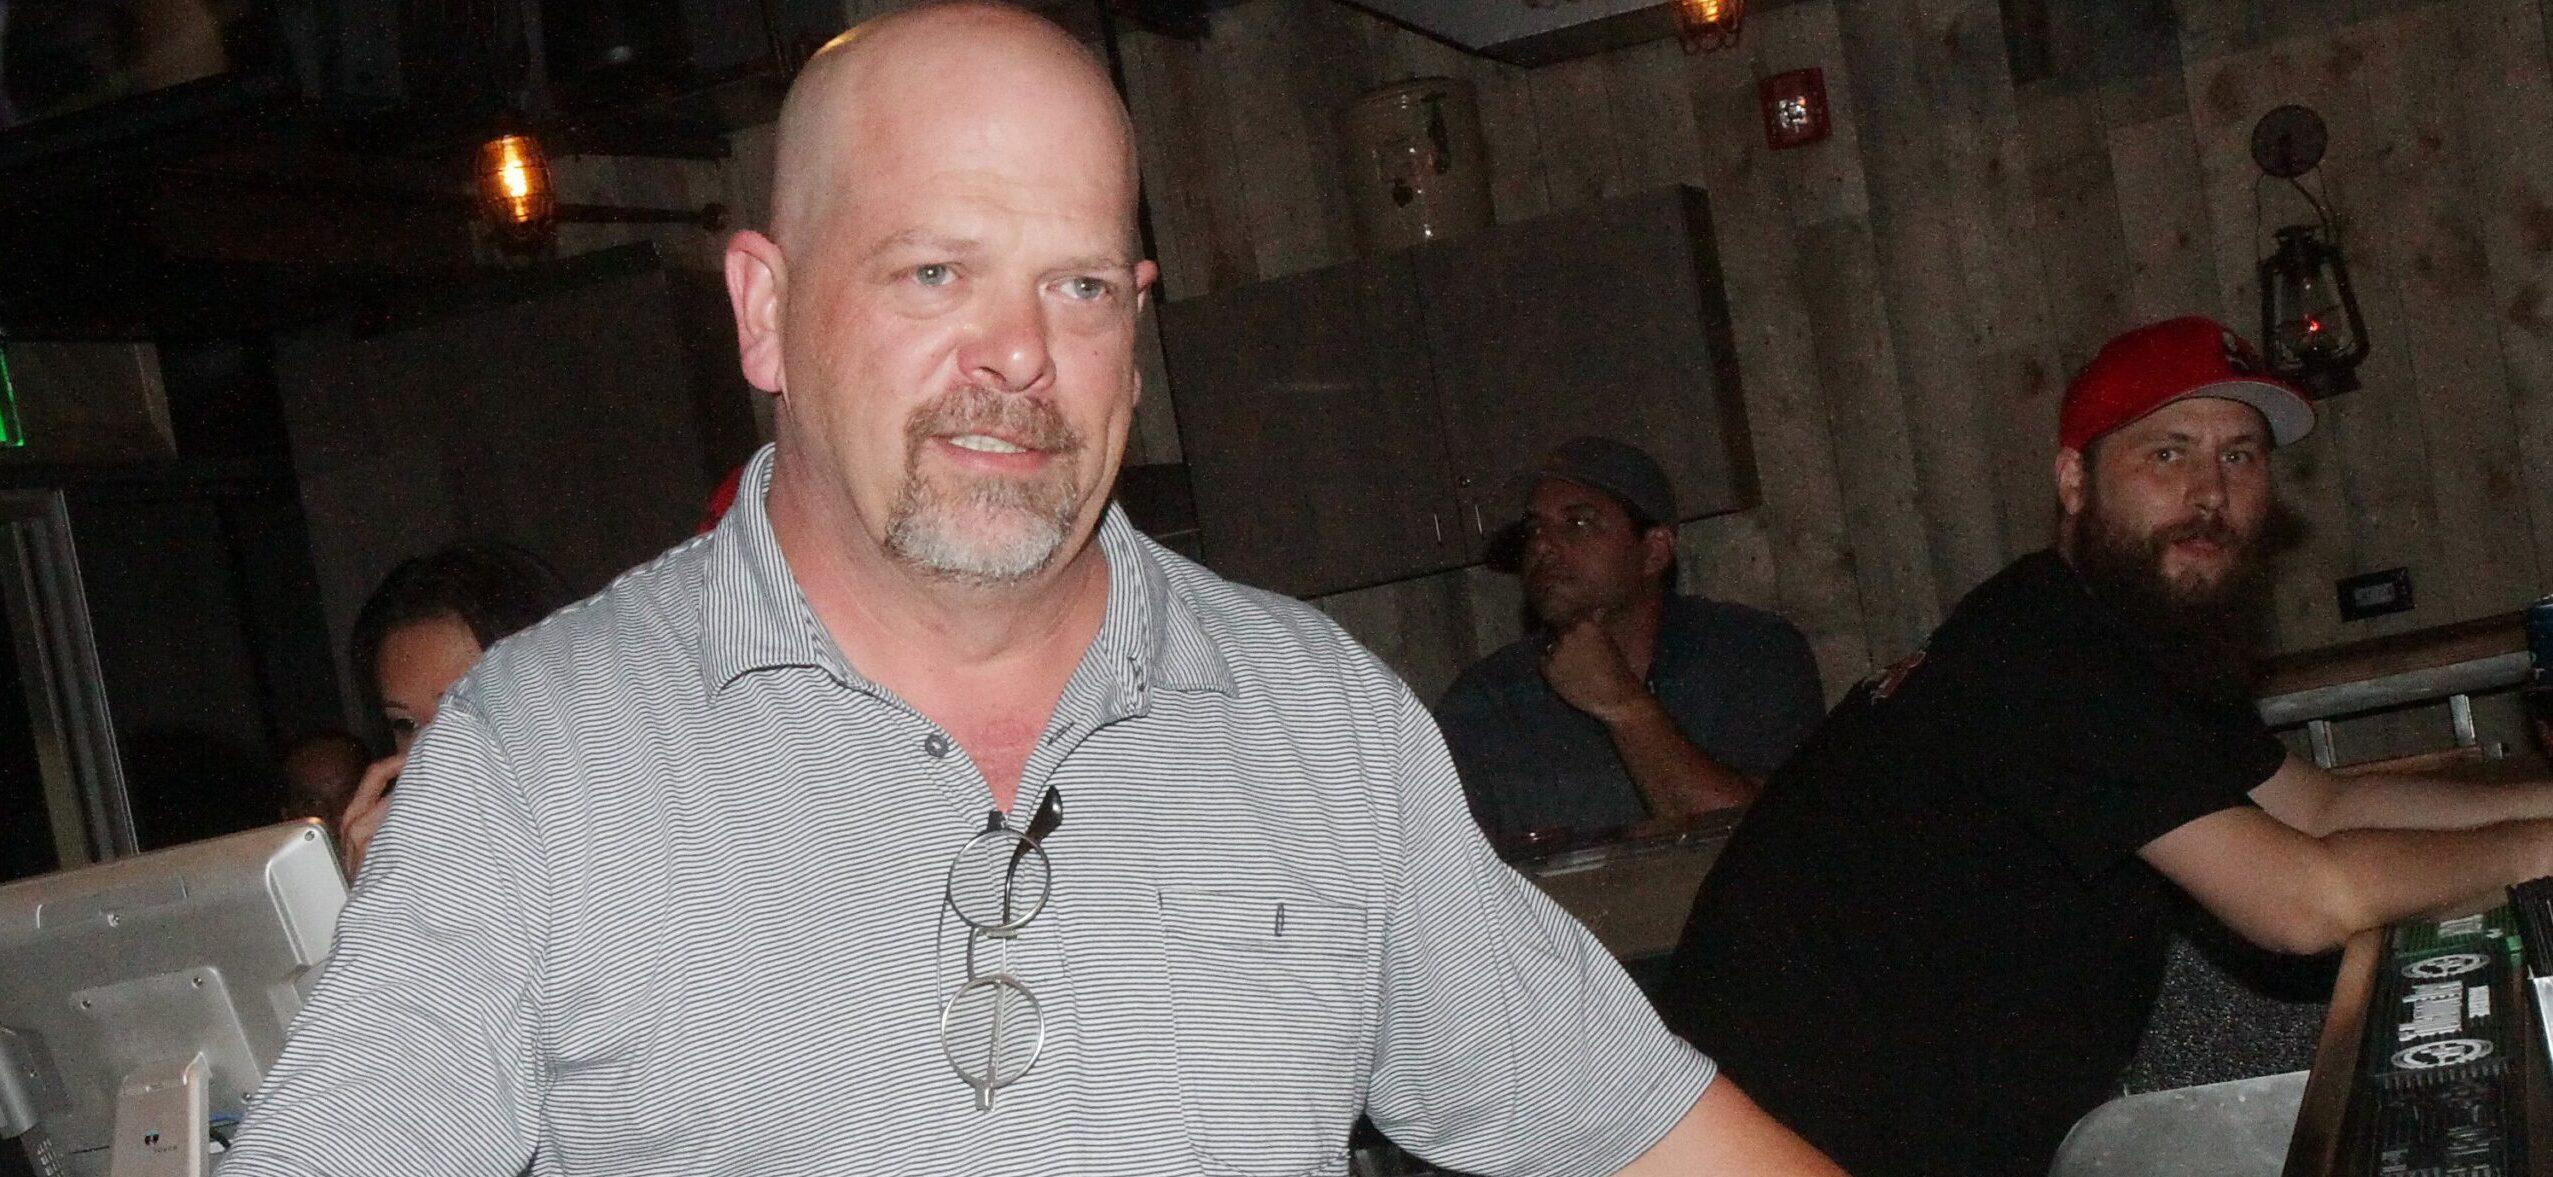 ‘Pawn Stars’ Rick Harrison’s Son Died From Fentanyl Overdose